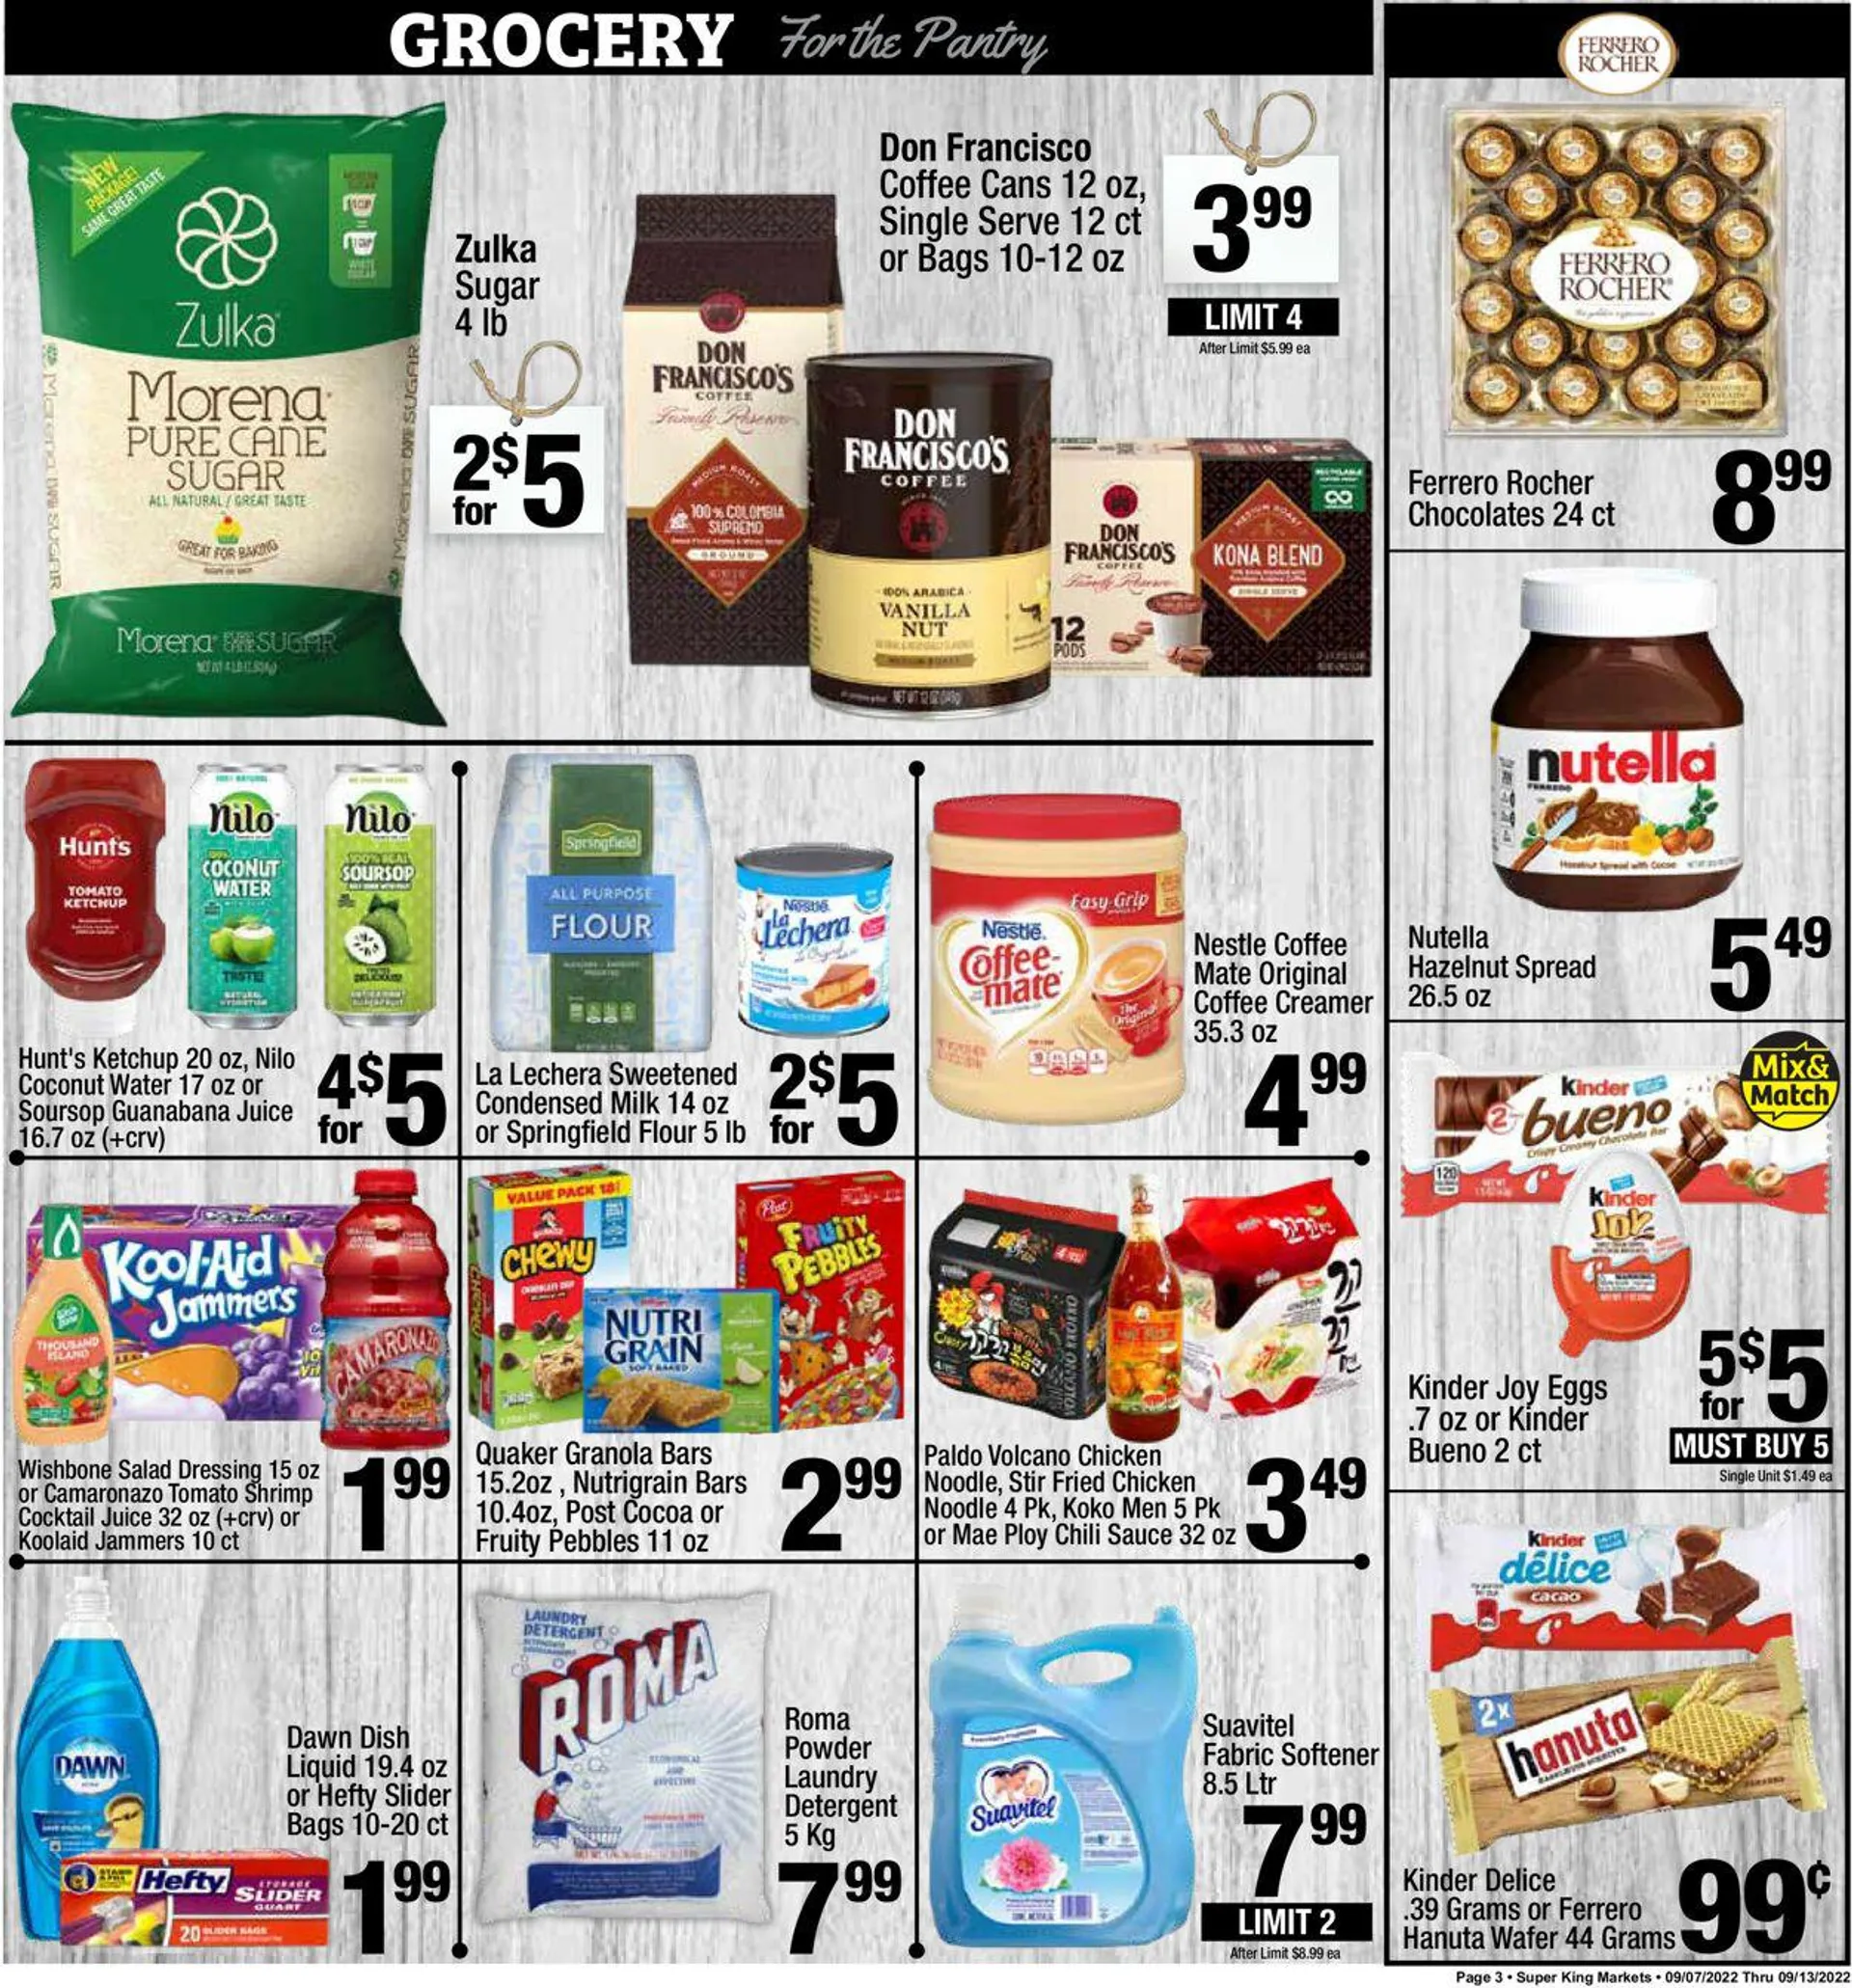 Super King Market Current weekly ad - 3